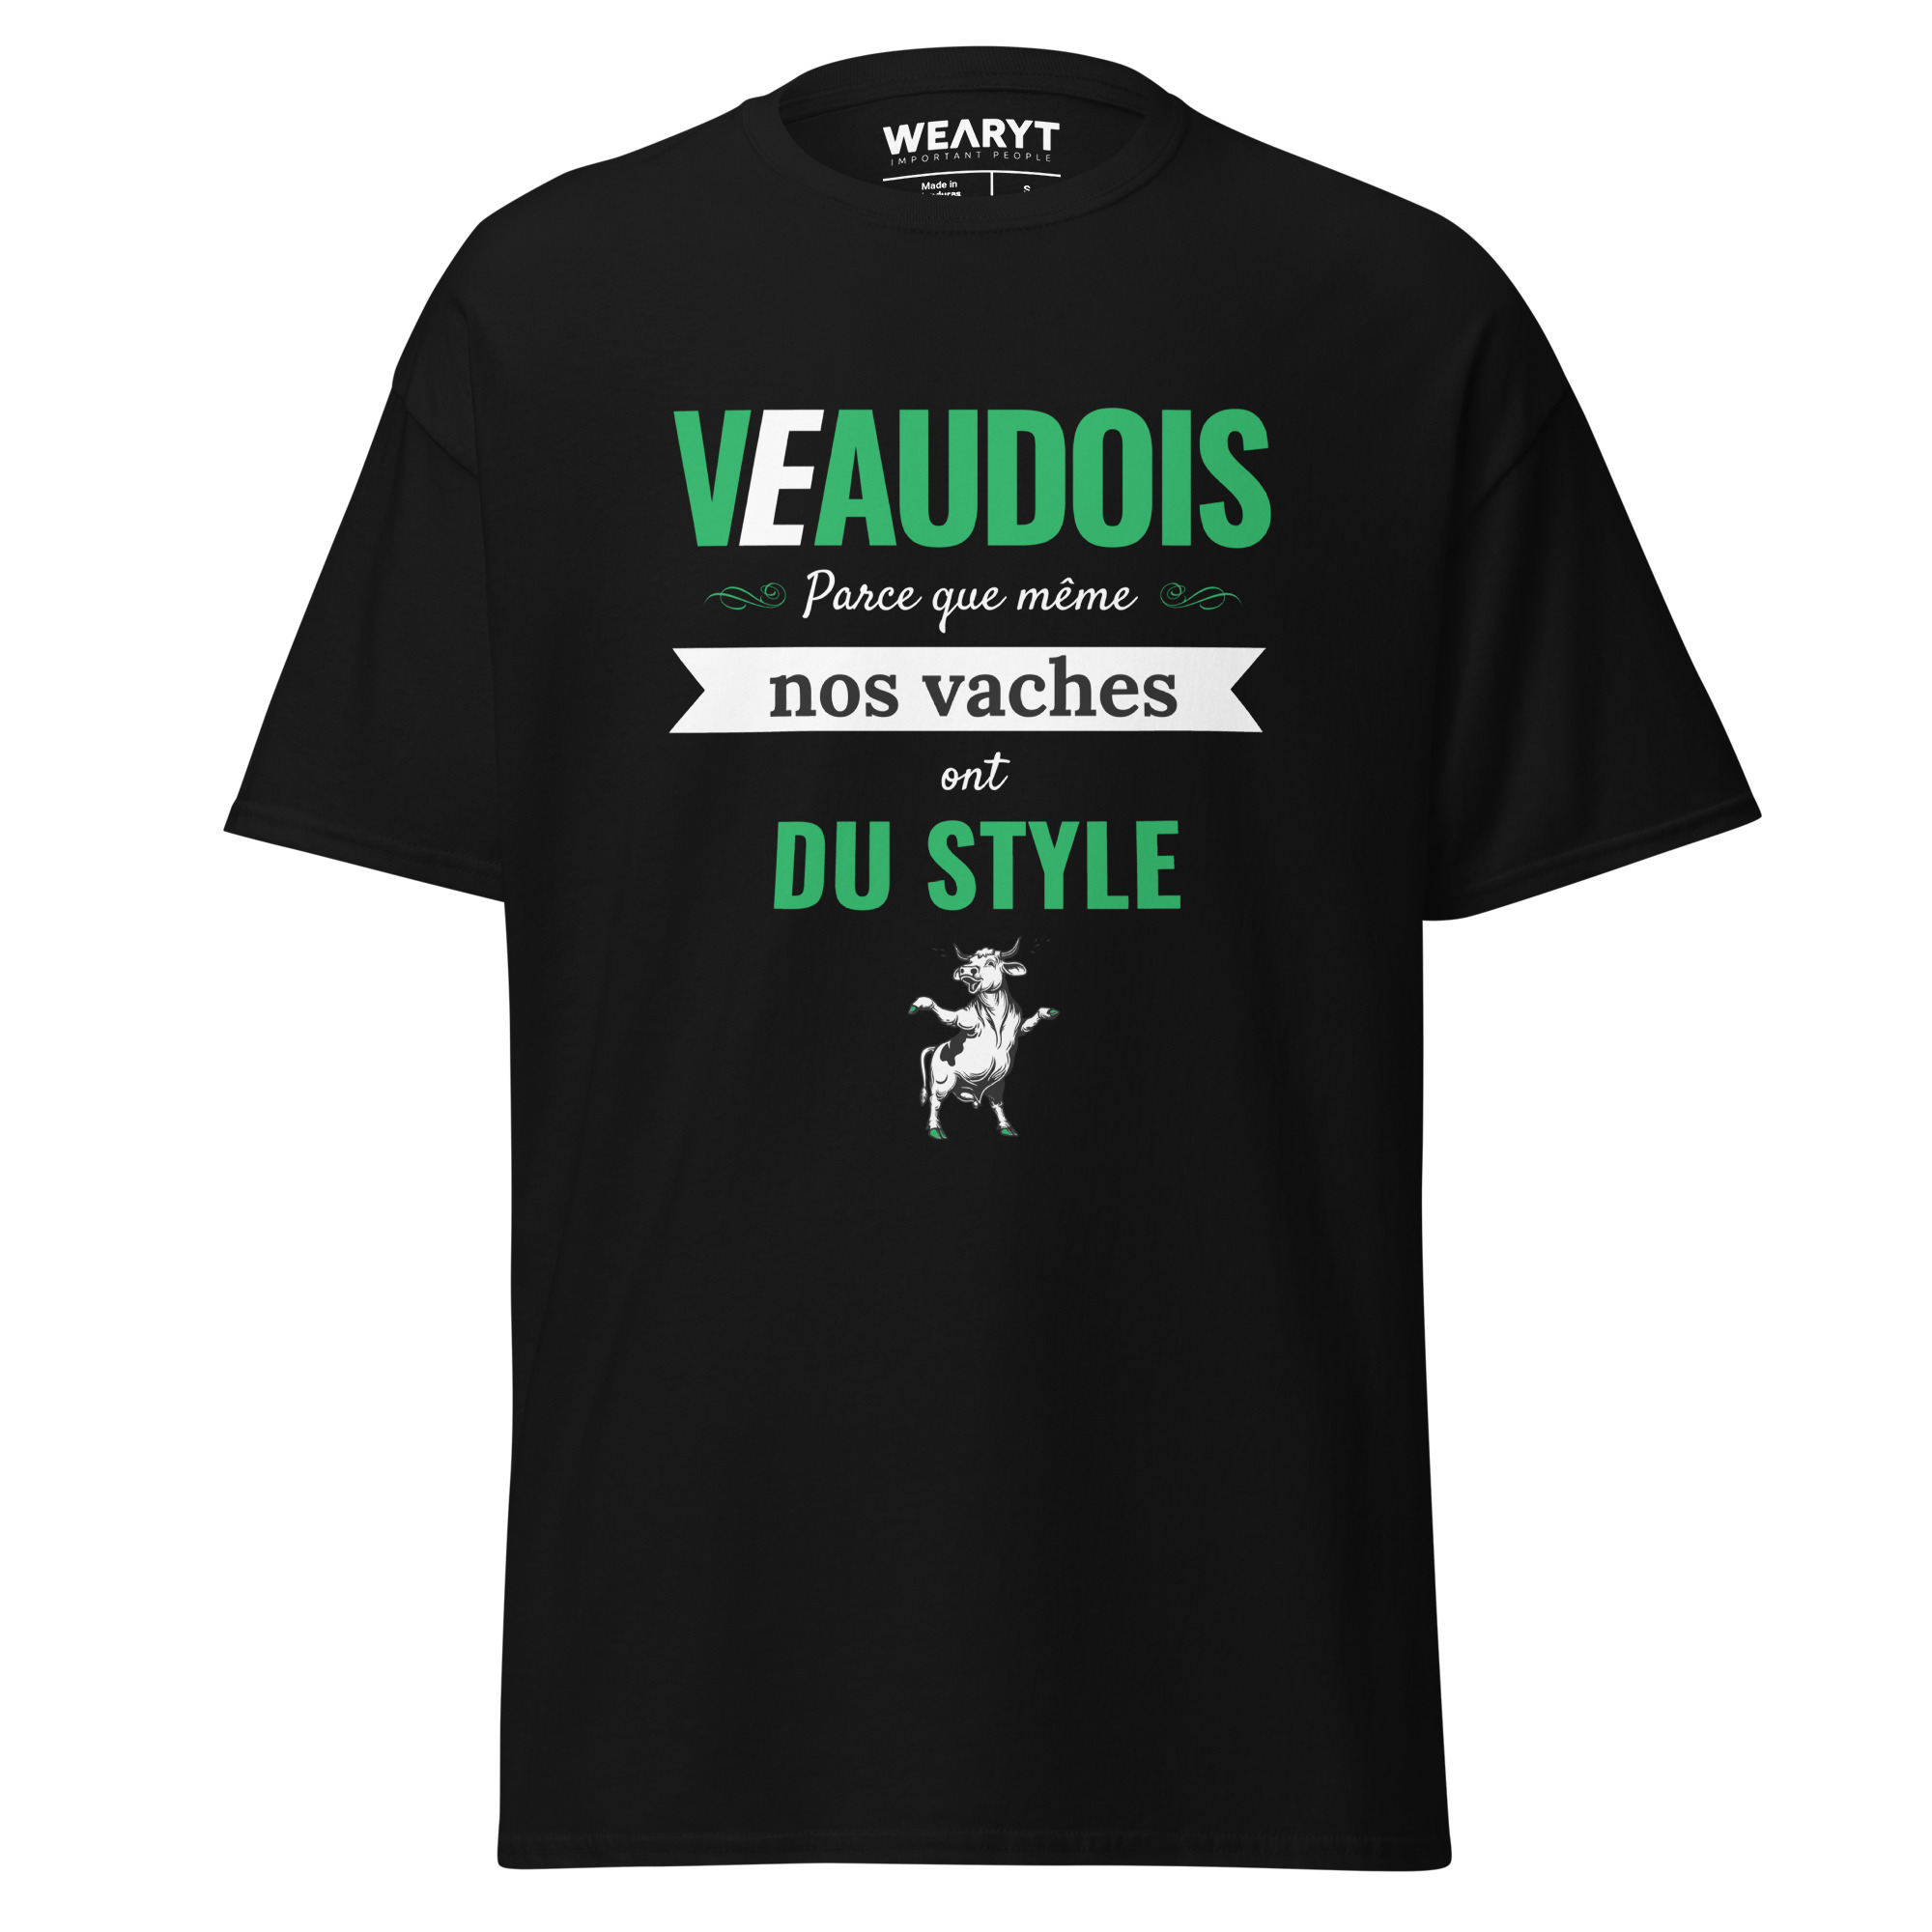 T-shirt – Les Vaudois – Because even our cows have style Men's Clothing Wearyt